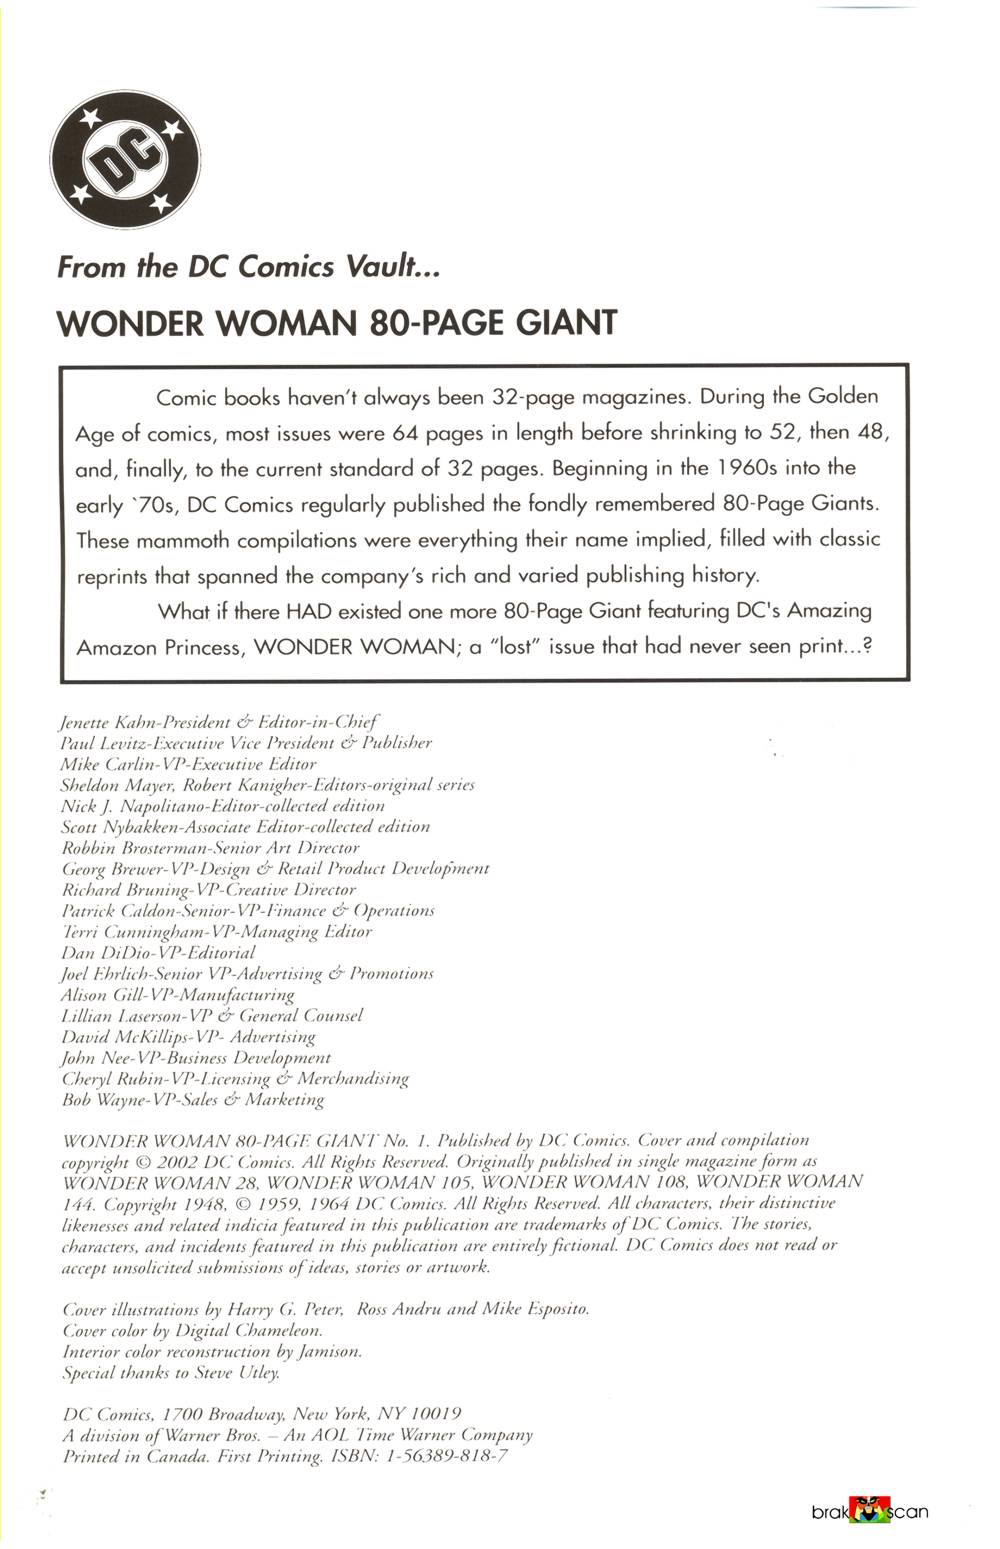 Read online Wonder Woman 80-Page Giant comic -  Issue # Full - 2